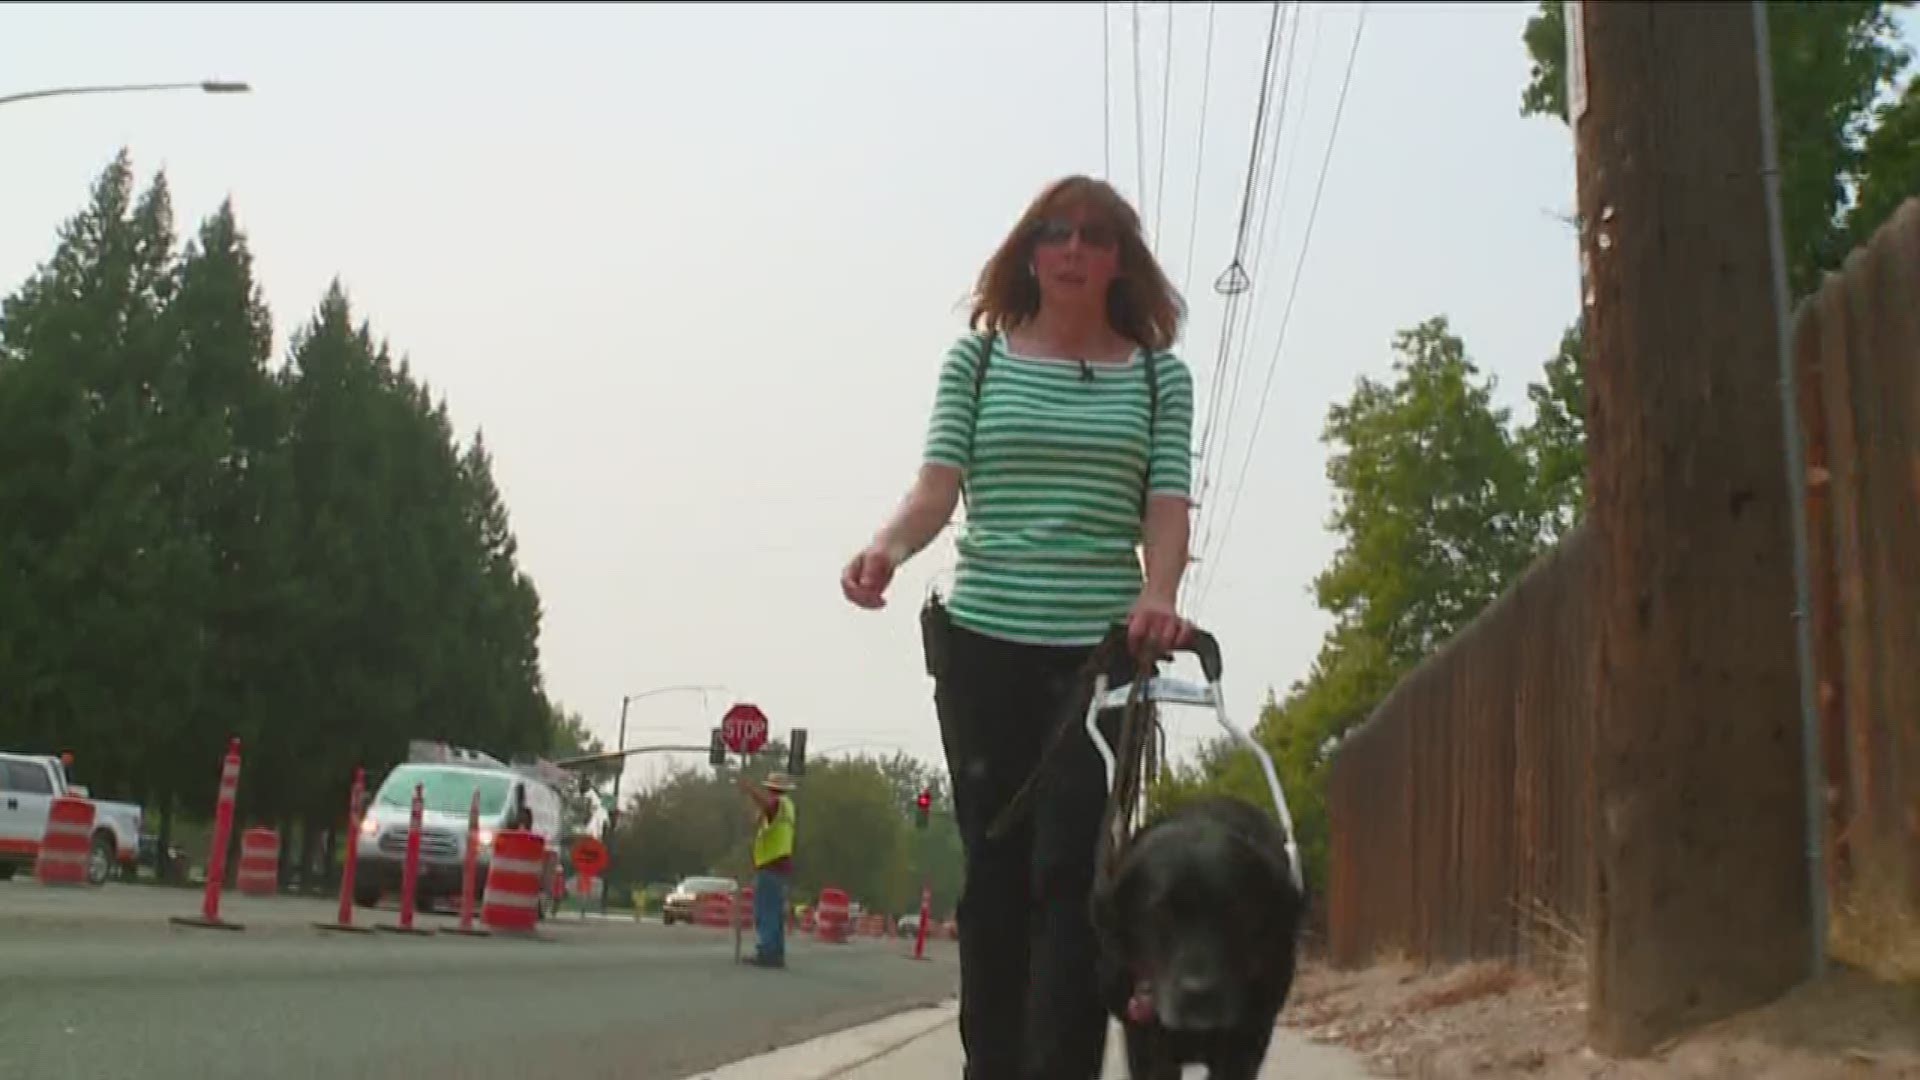 KTVB wanted to grasp what it was like for pedestrians, cyclists and people with disabilities to traverse construction zones in Boise. In Part II of "Where the Sidewalk Ends" we asked a blind Boise woman to show us what it's like to navigate an area posing